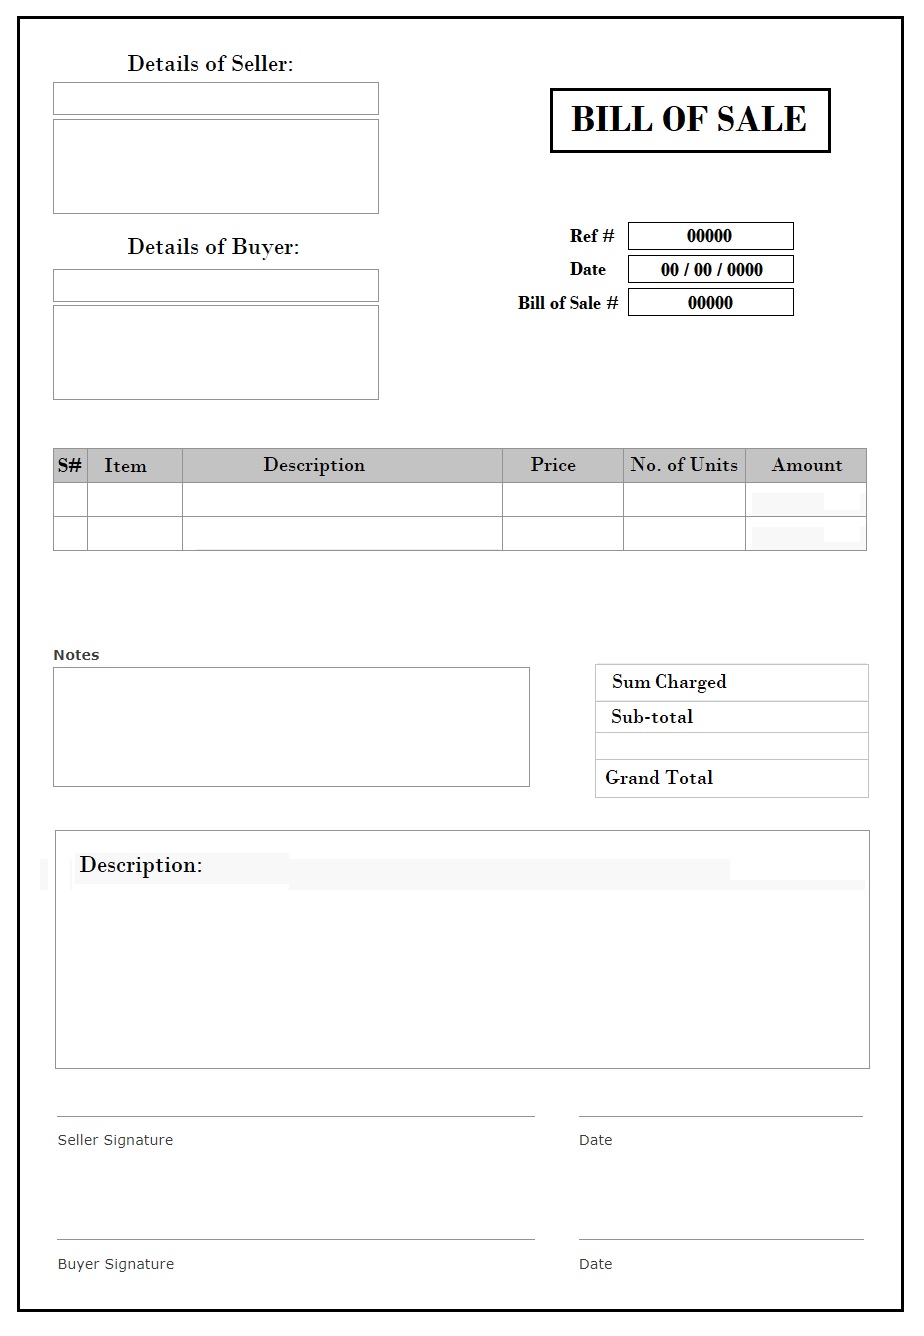 printable-bill-of-sale-template-free-word-excel-templates